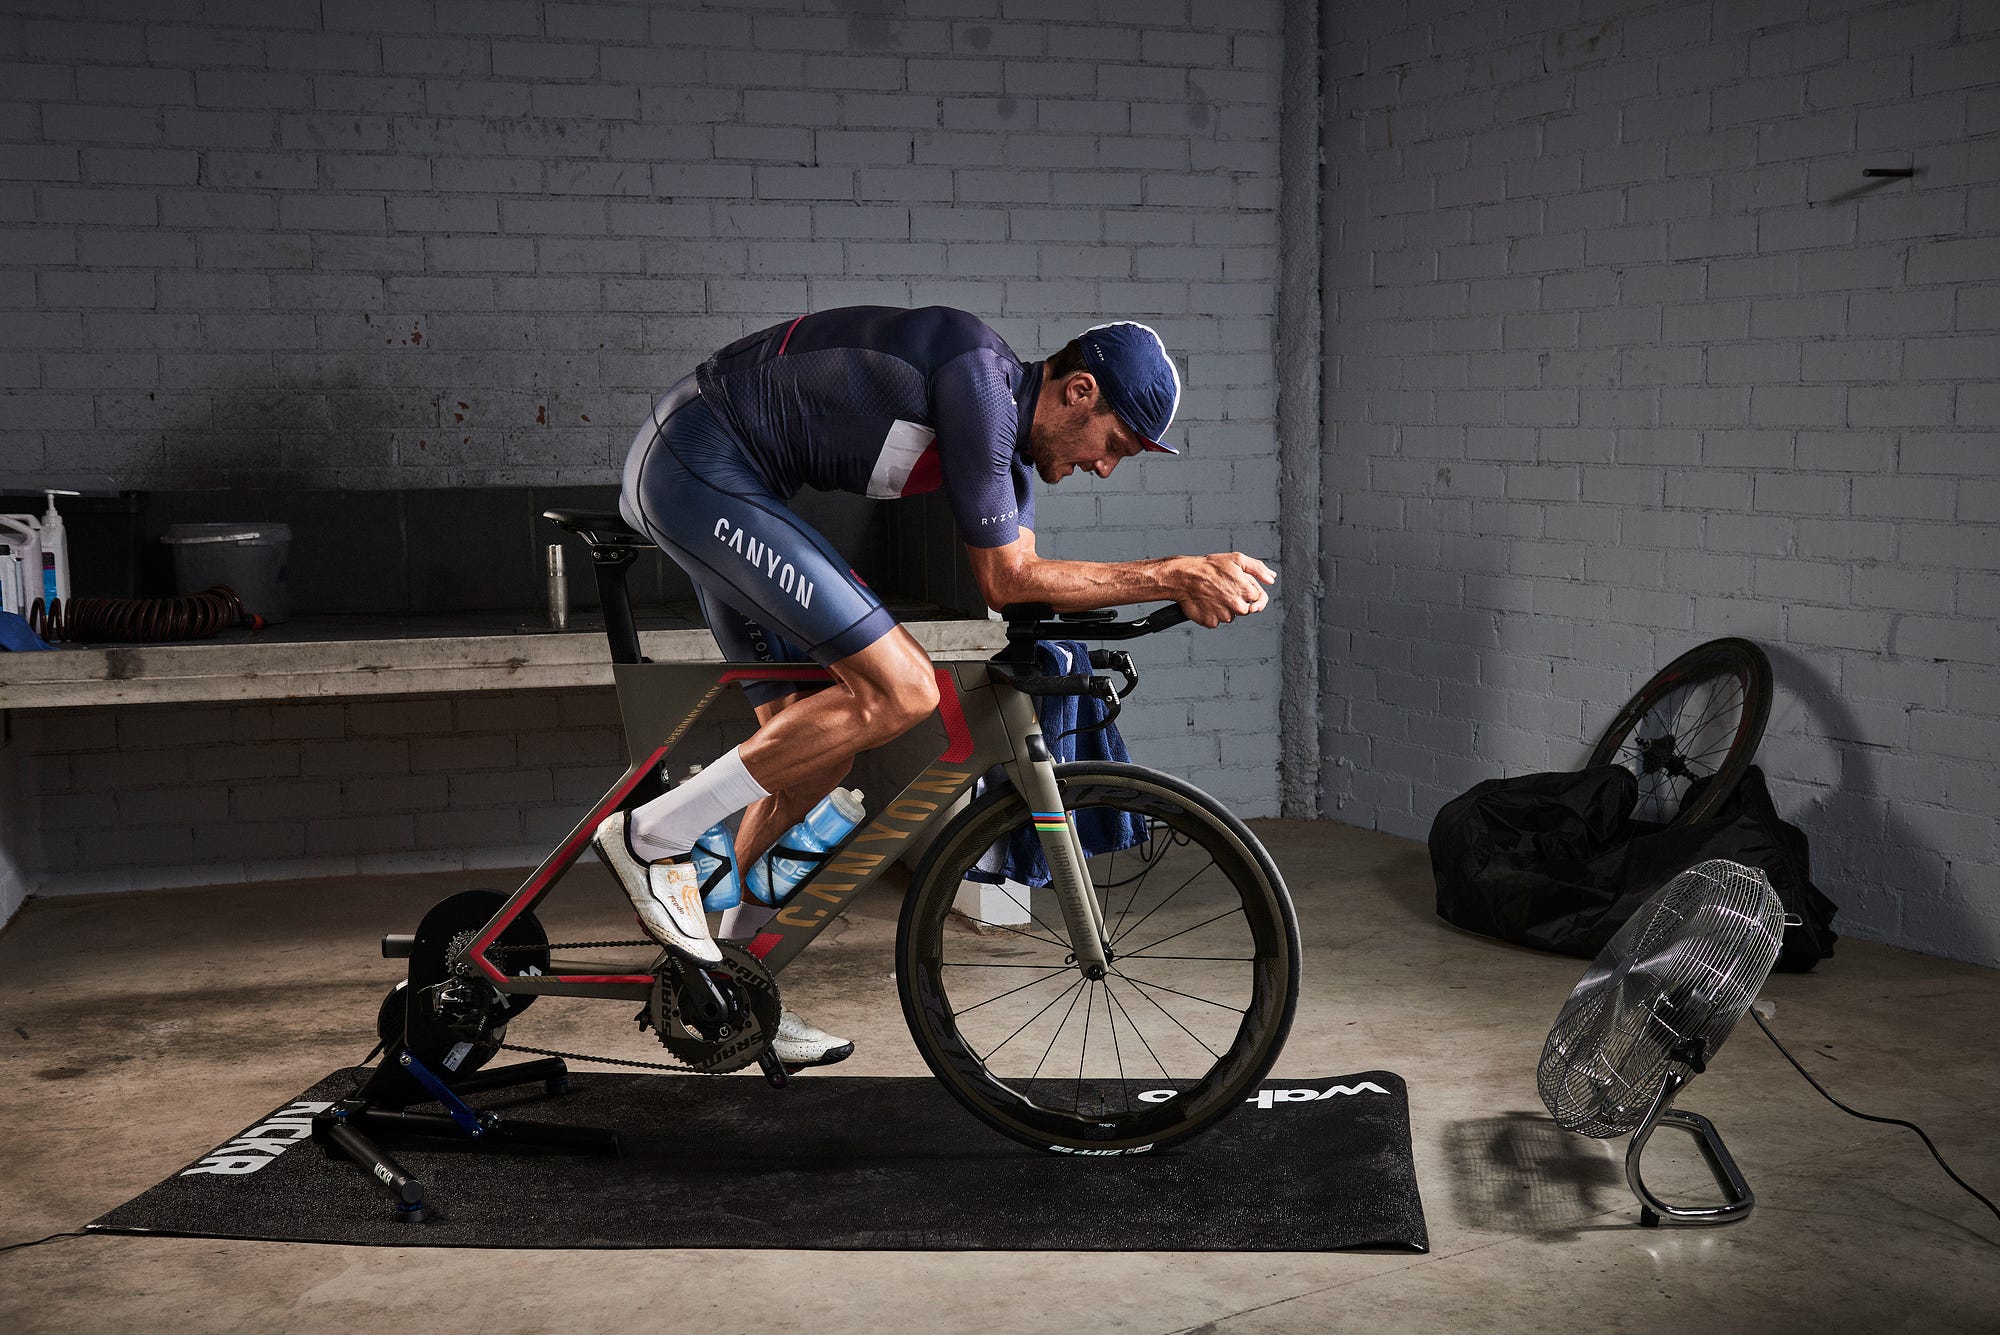 Wahoo Fitness takes Strava indoors with the Segments cycling app